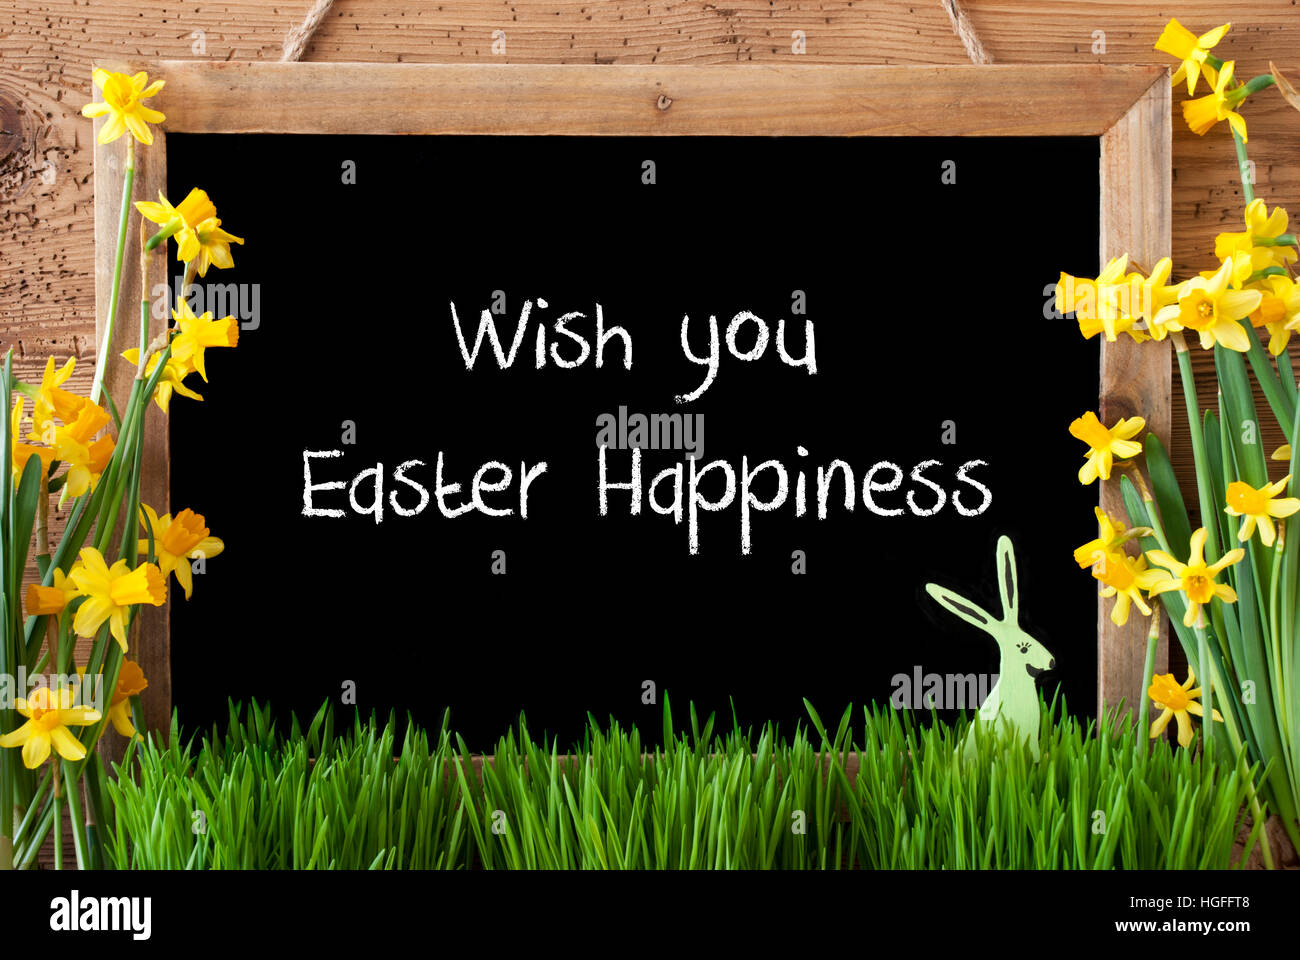 Narcissus, Bunny, Text Wish You Easter Happiness Stock Photo